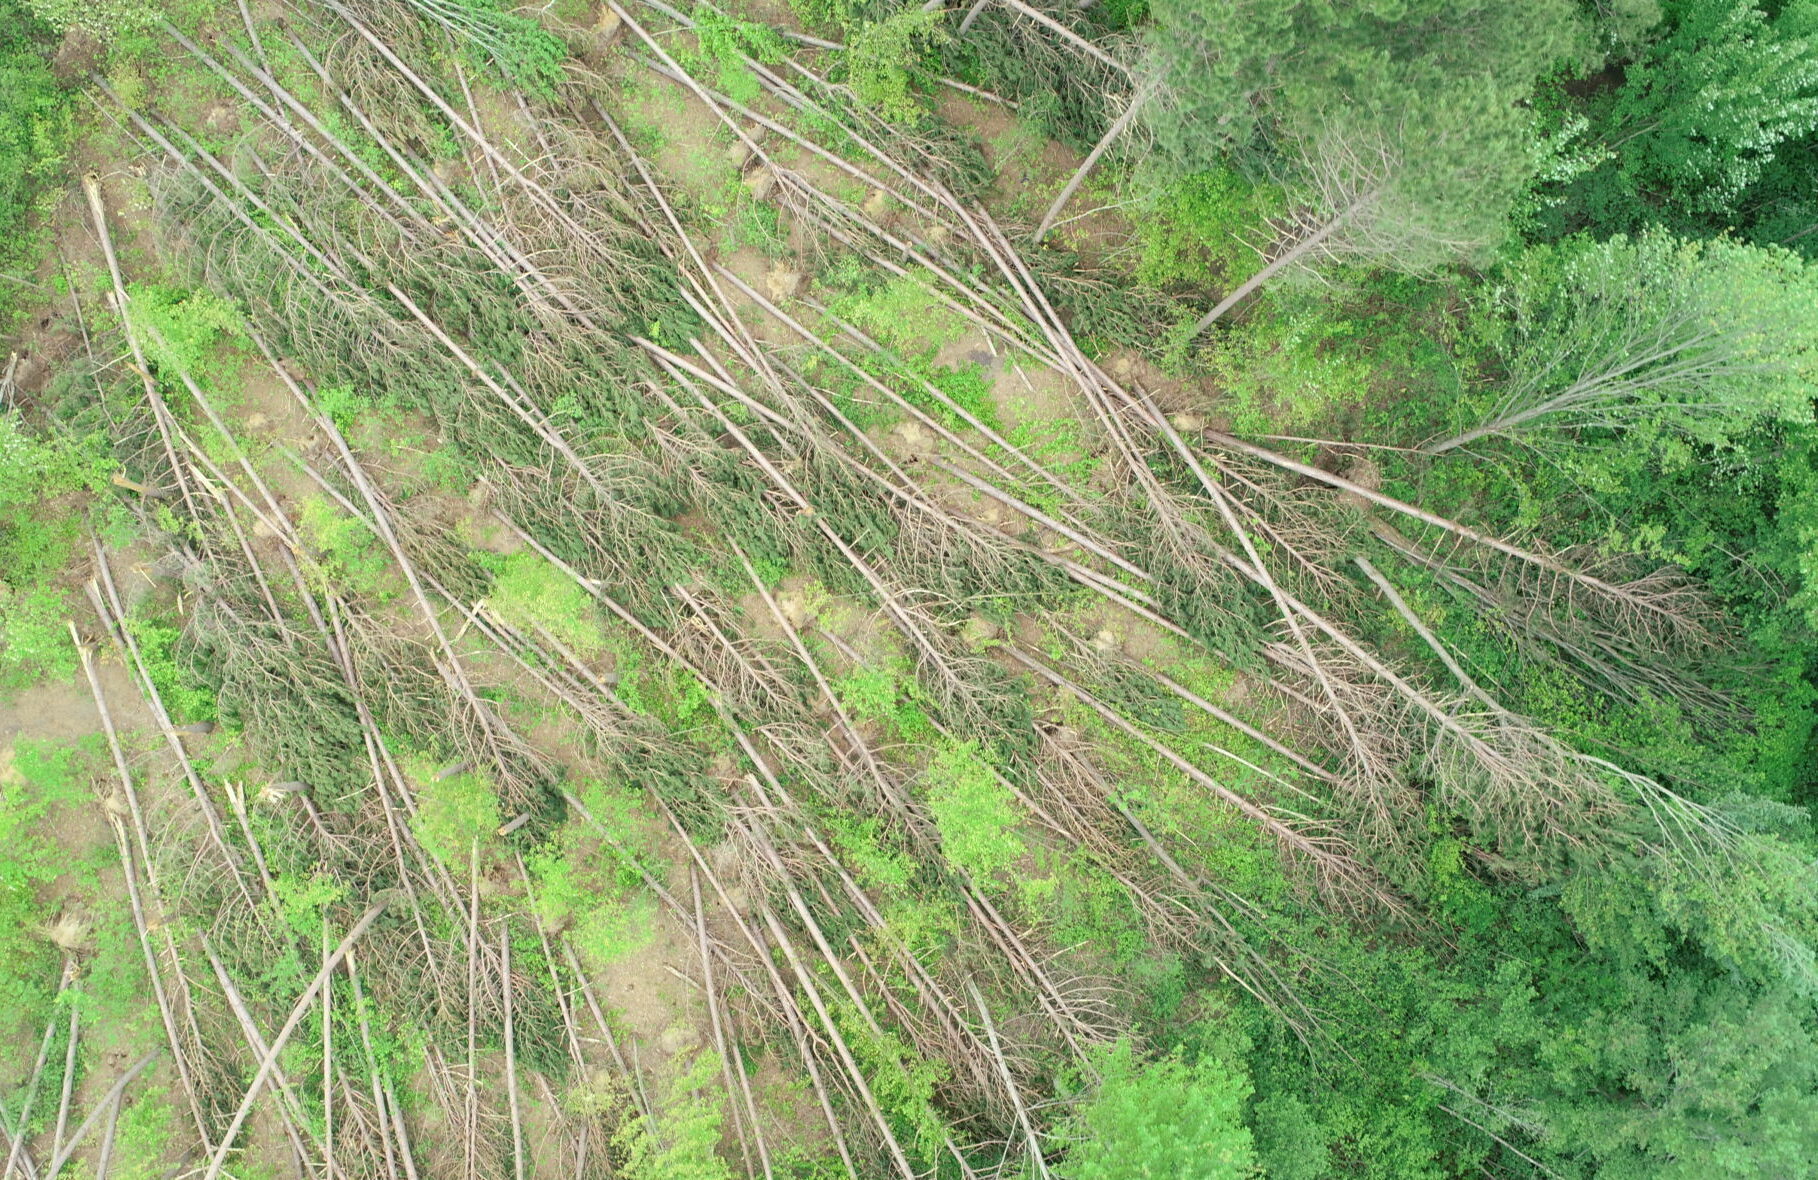 Aerial view of the damage following the derecho storm in May 2022